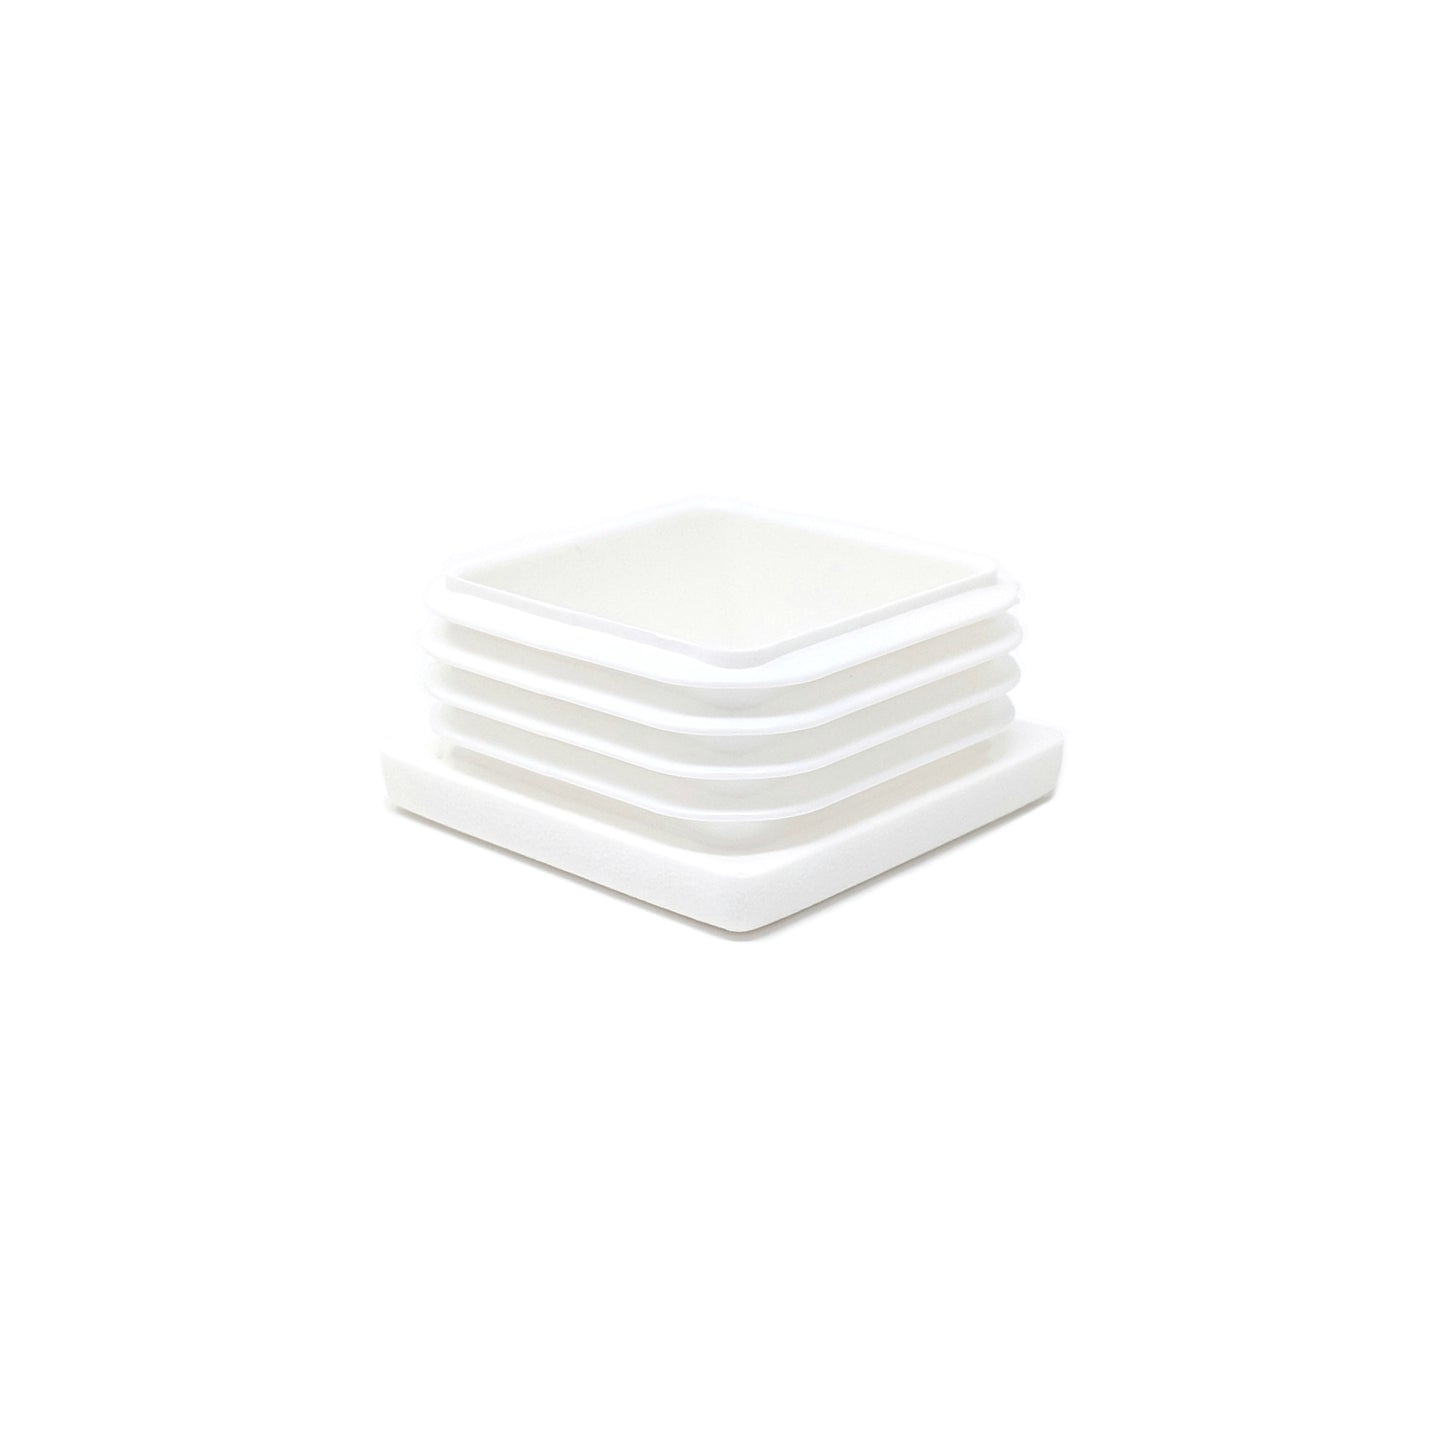 Square Tube Inserts 40mm x 40mm White | Made in Germany | Keay Vital Parts - Keay Vital Parts